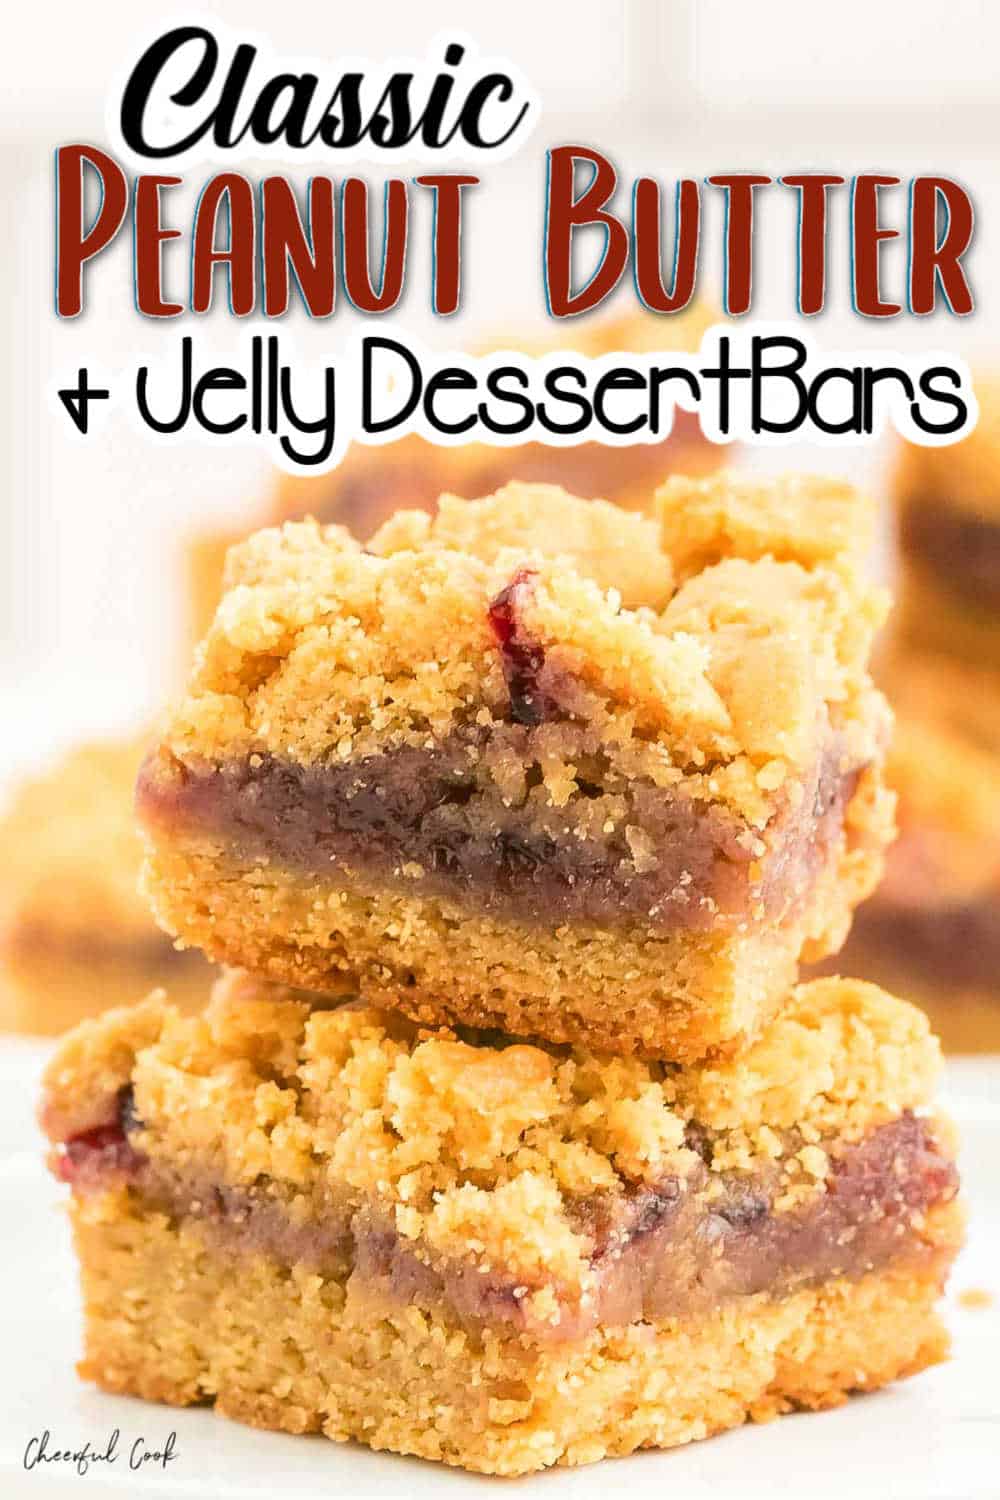 Buttery, crumbly, and chewy these PB & J dessert bars are a real treat - and not just for kids! #cheerfulcook #pbj #peanutbutter #dessert #dessertbars #jelly via @cheerfulcook